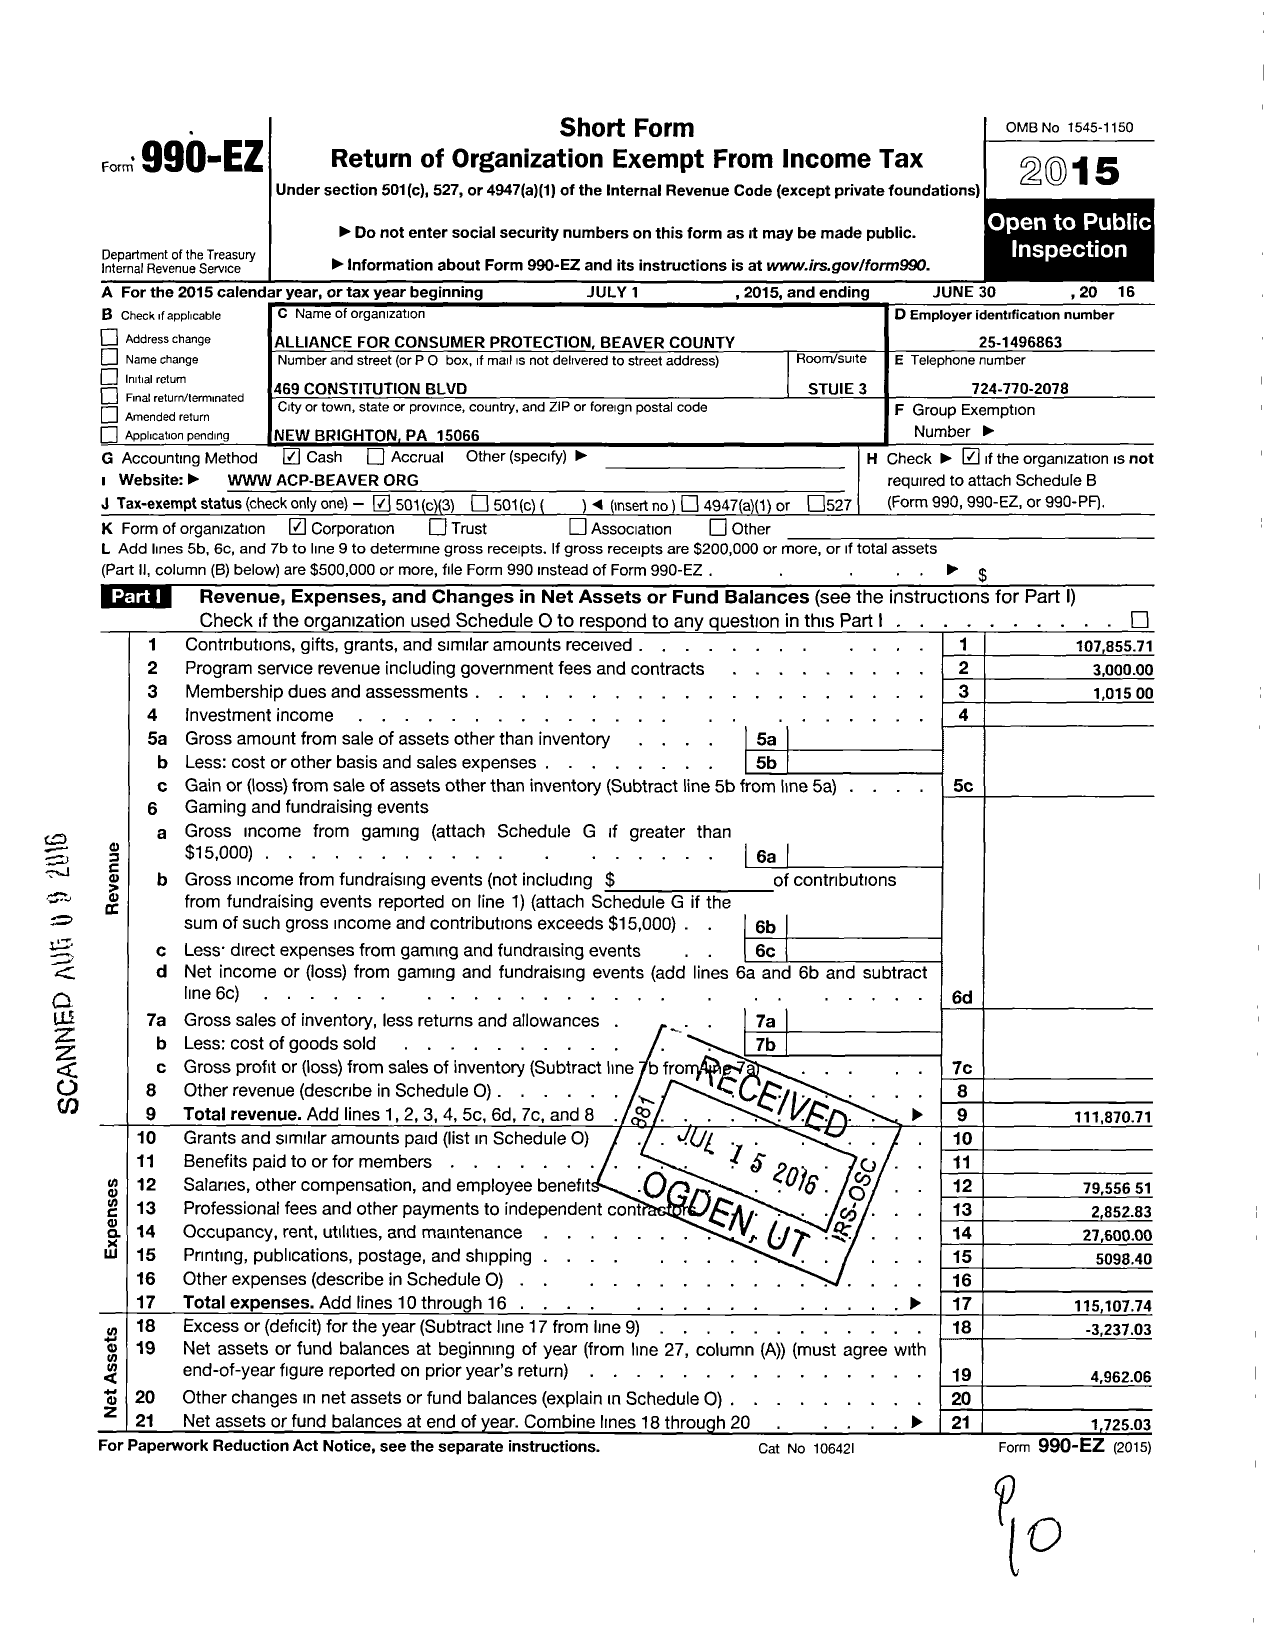 Image of first page of 2015 Form 990EZ for Alliance for Consumer Protection Beaver County